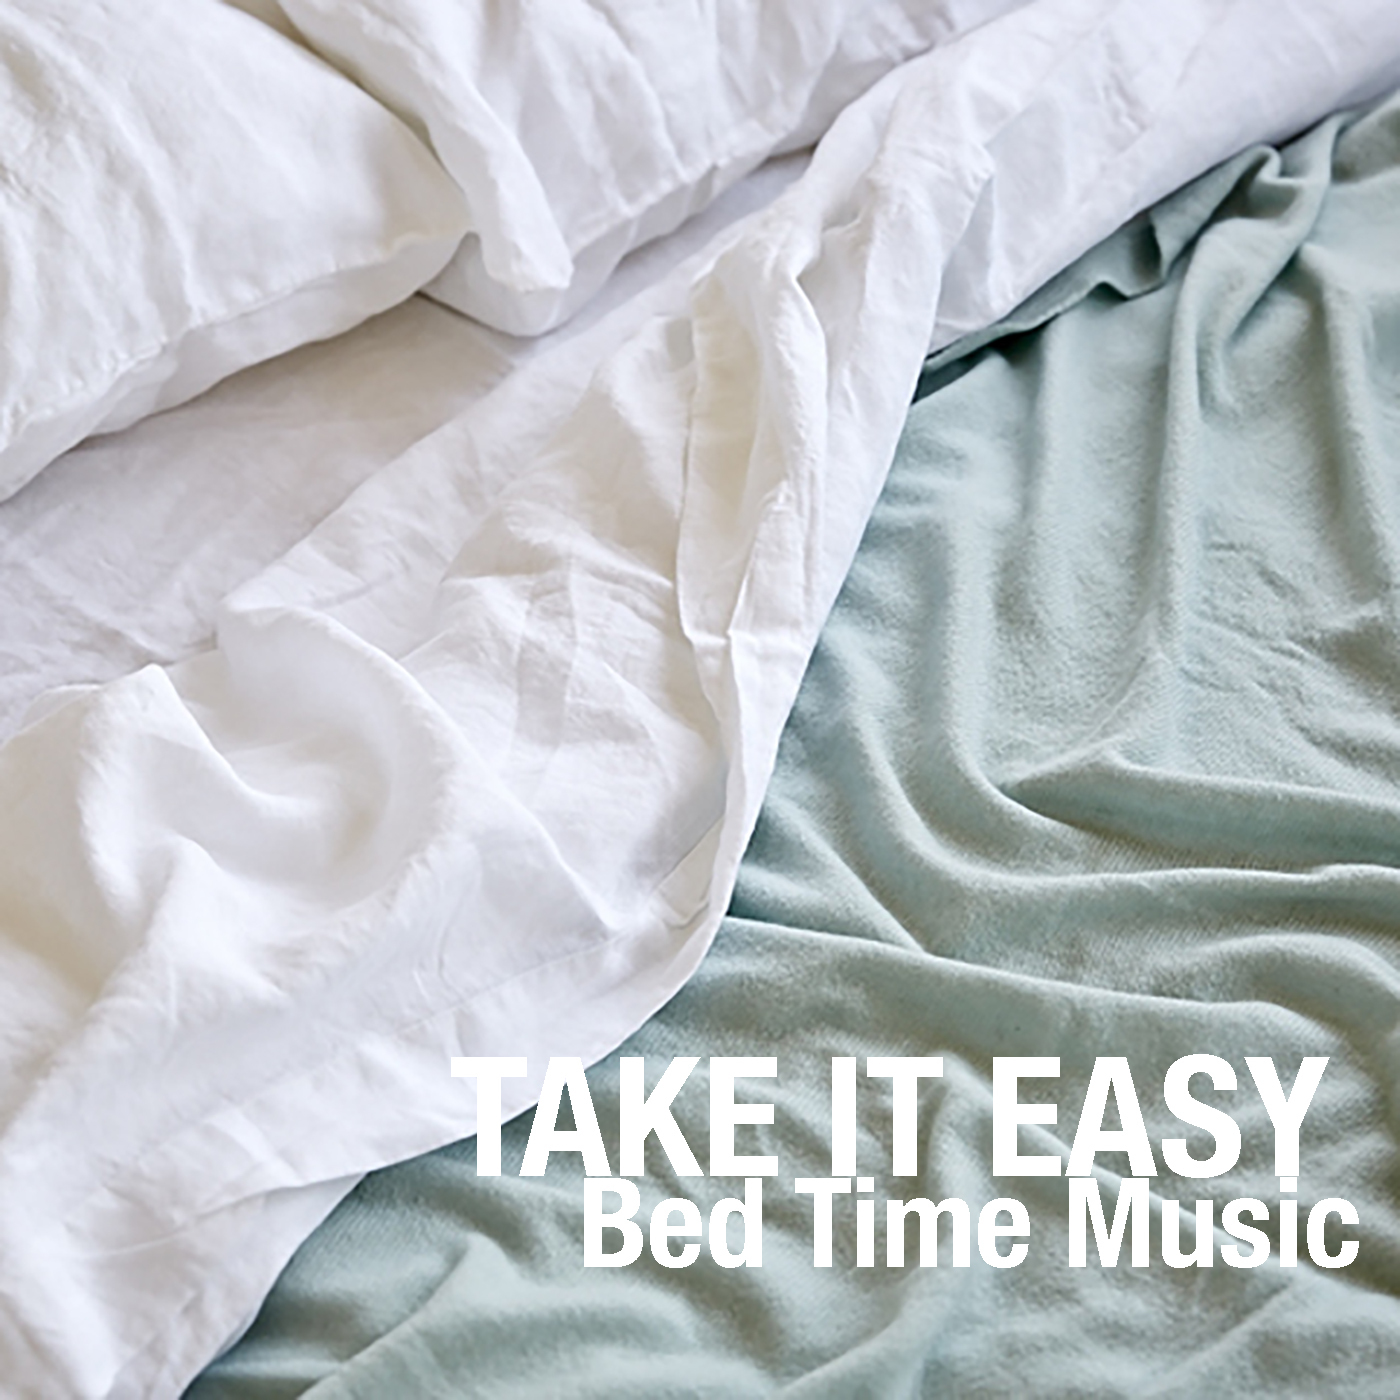 Take It Easy: Bed Time Music